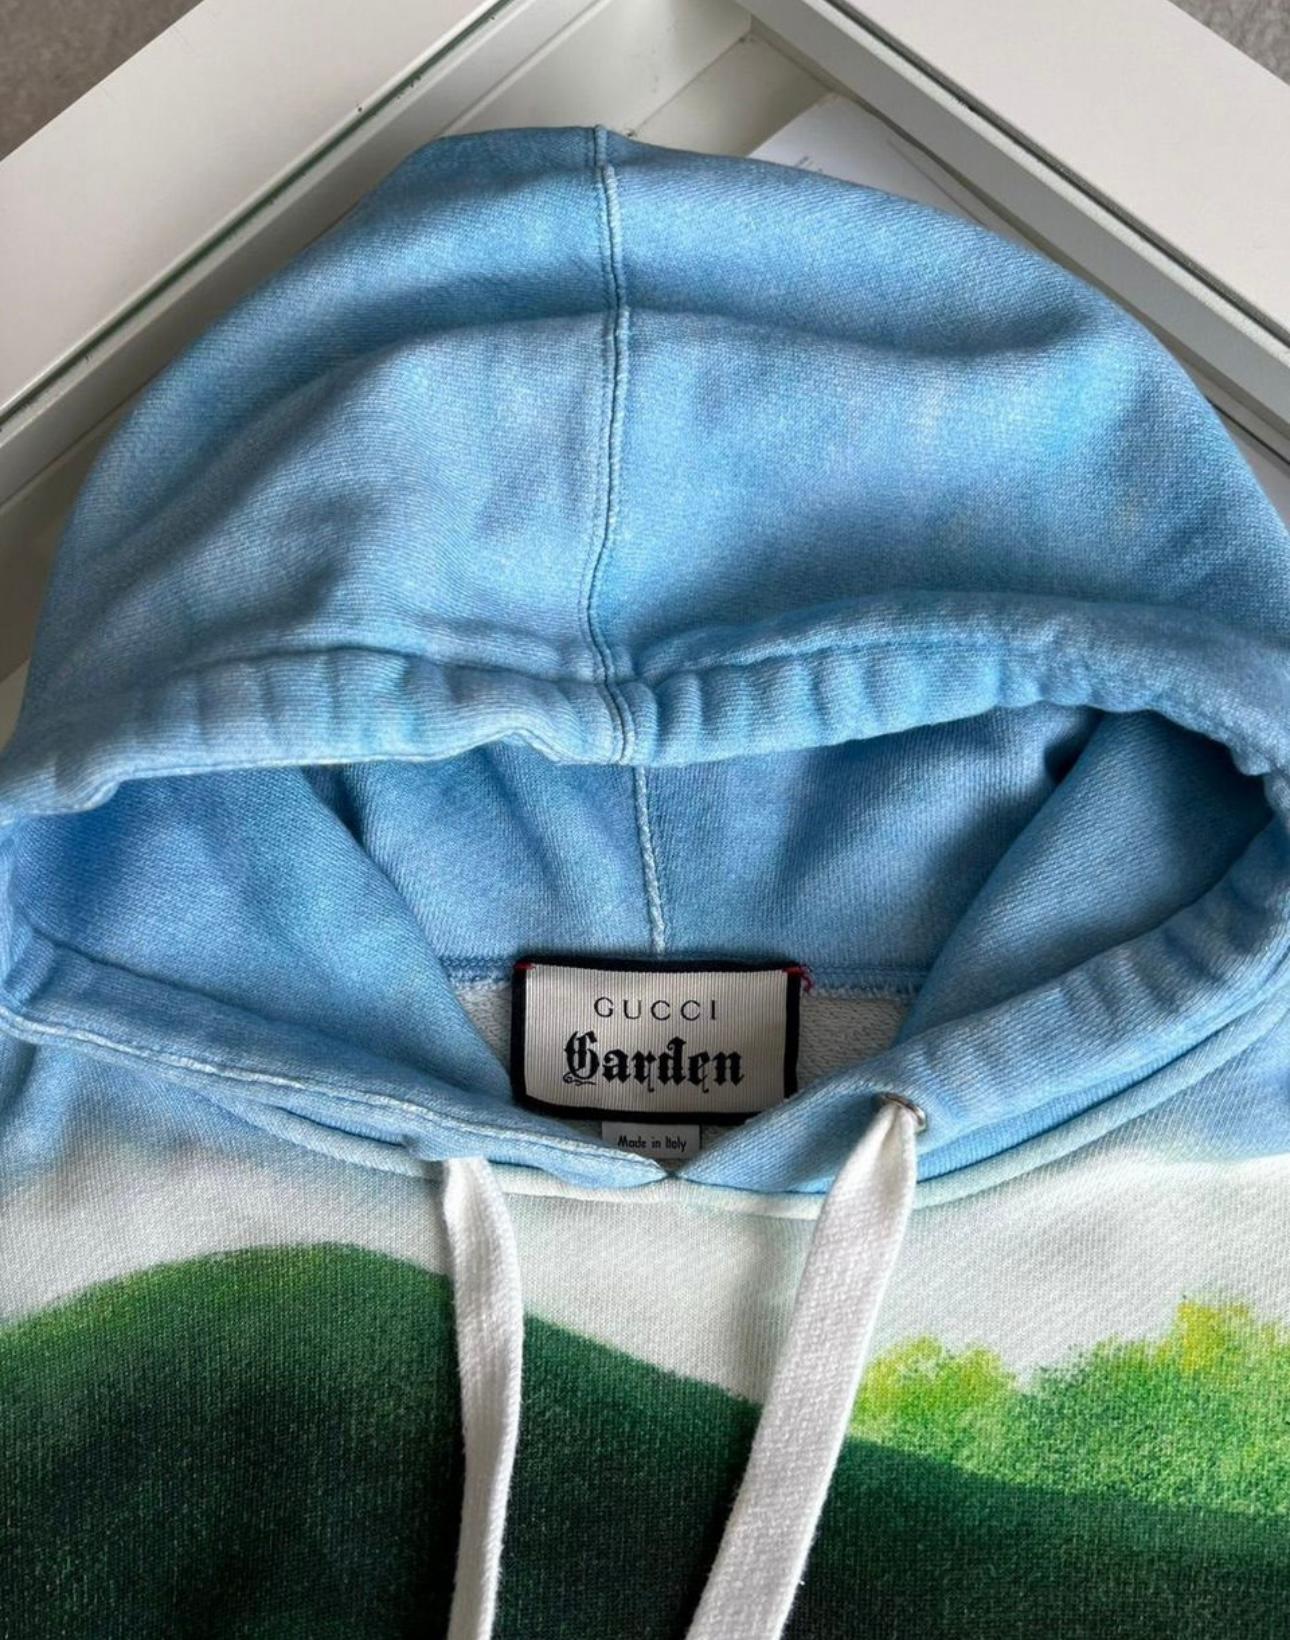 Gucci Garden Rare Collectors Hoodie For Sale 3